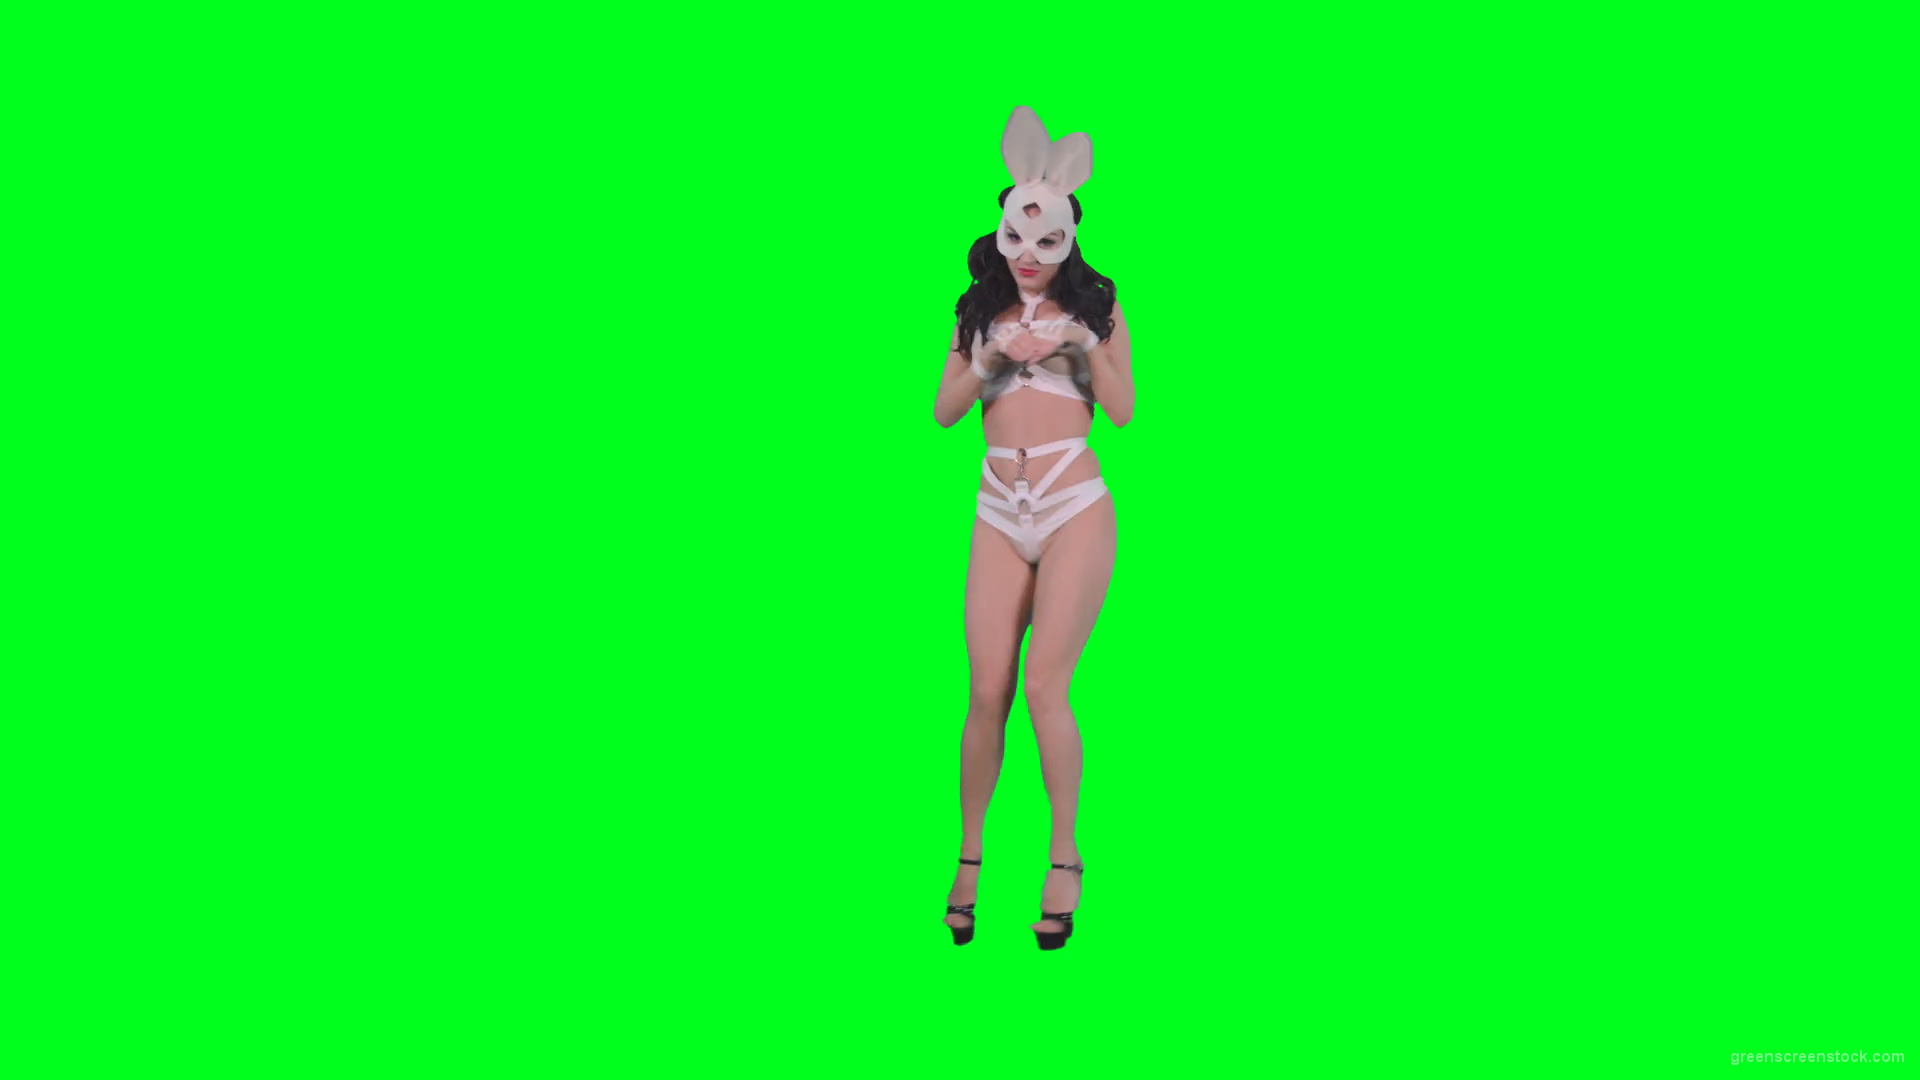 Young-girl-in-rabbit-costume-jumping-and-spinning-on-green-screen-4K-Video-Footage-1920_007 Green Screen Stock